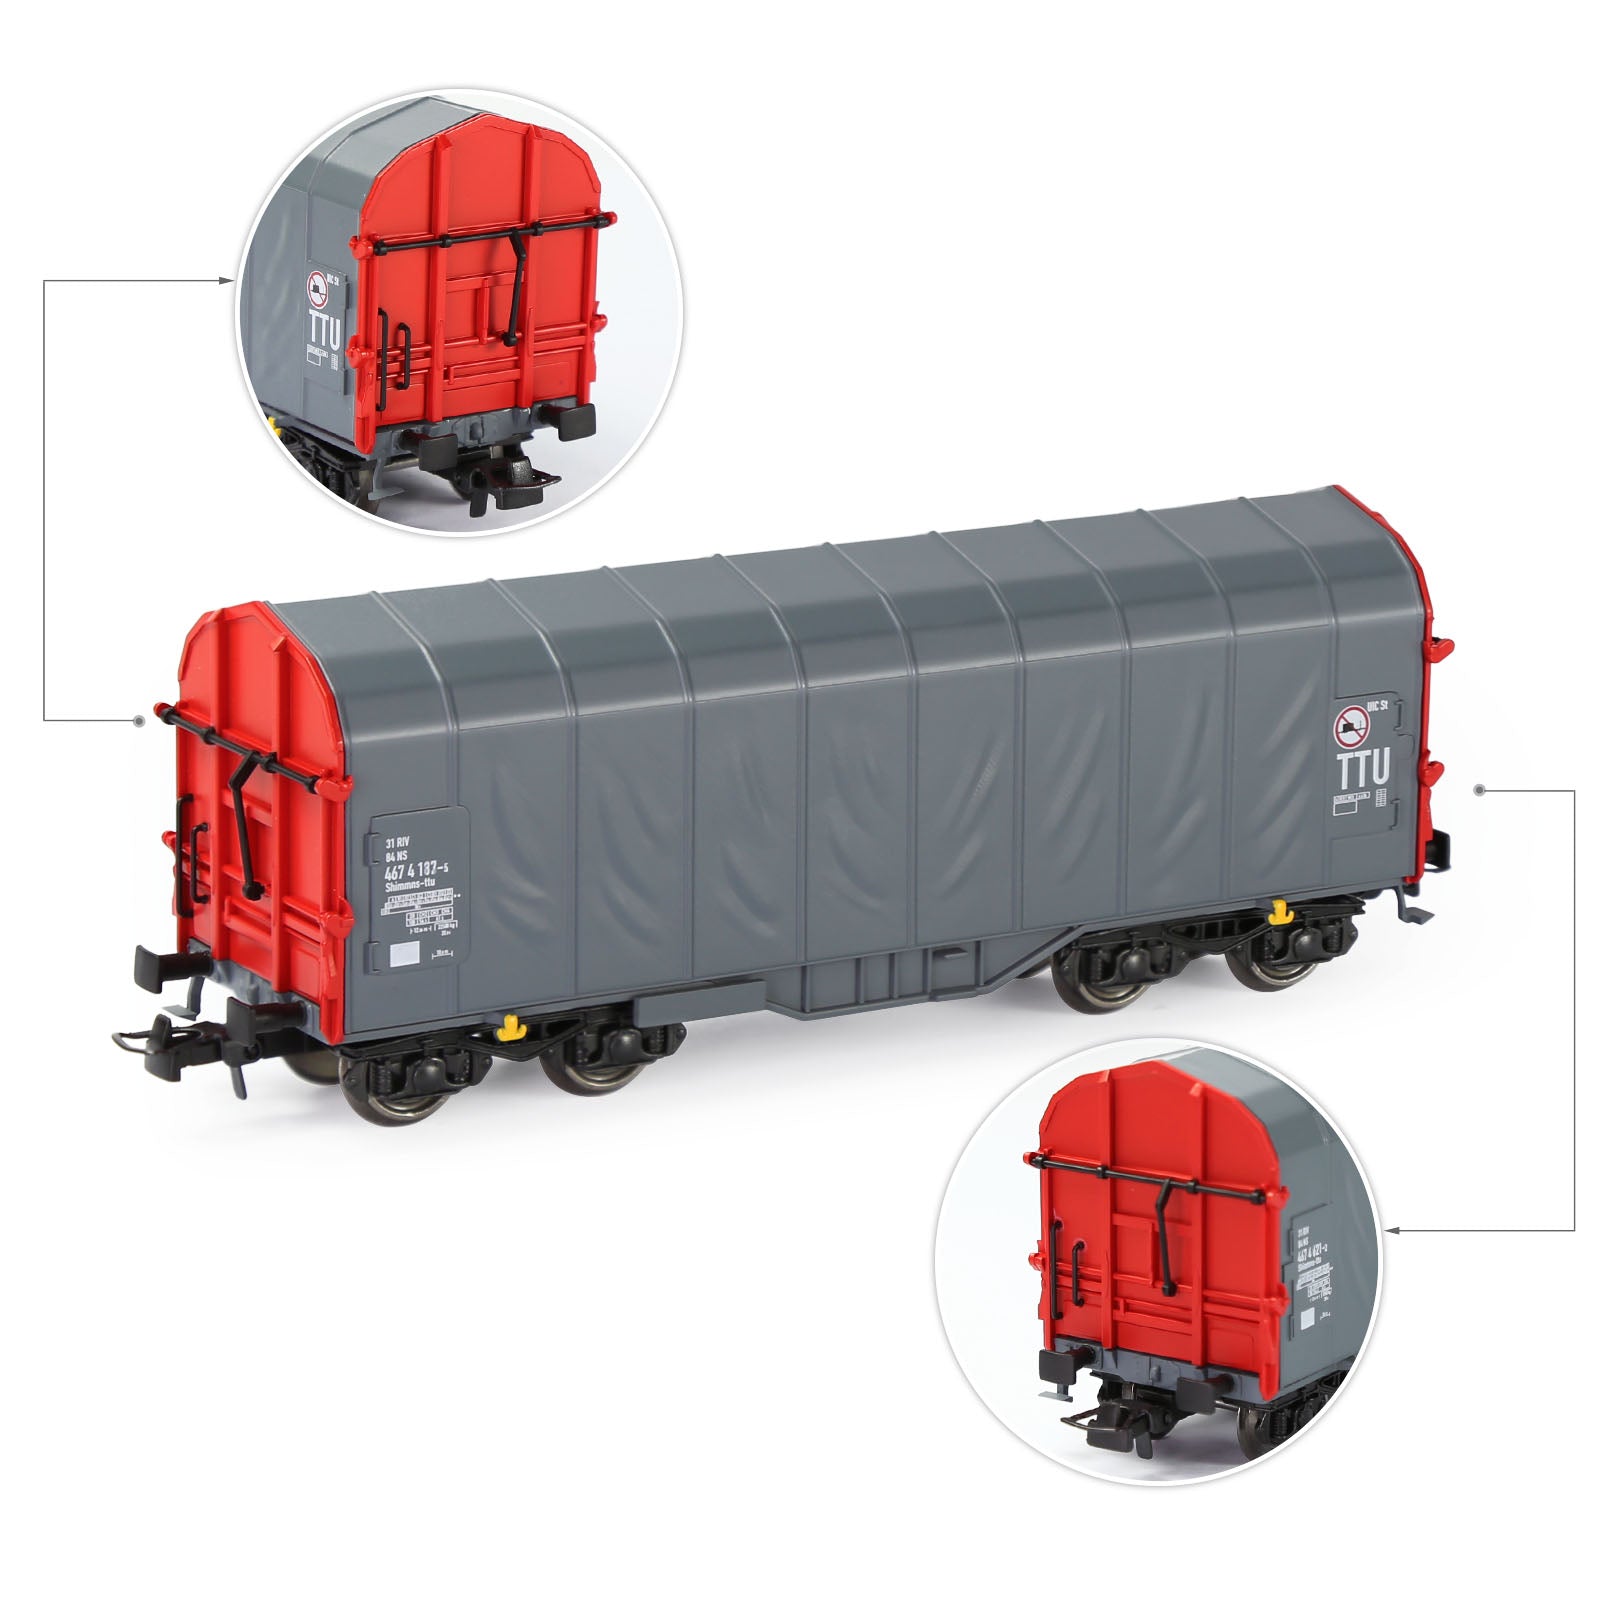 C8762 1pc HO Scale 1:87 Model Covered Wagon